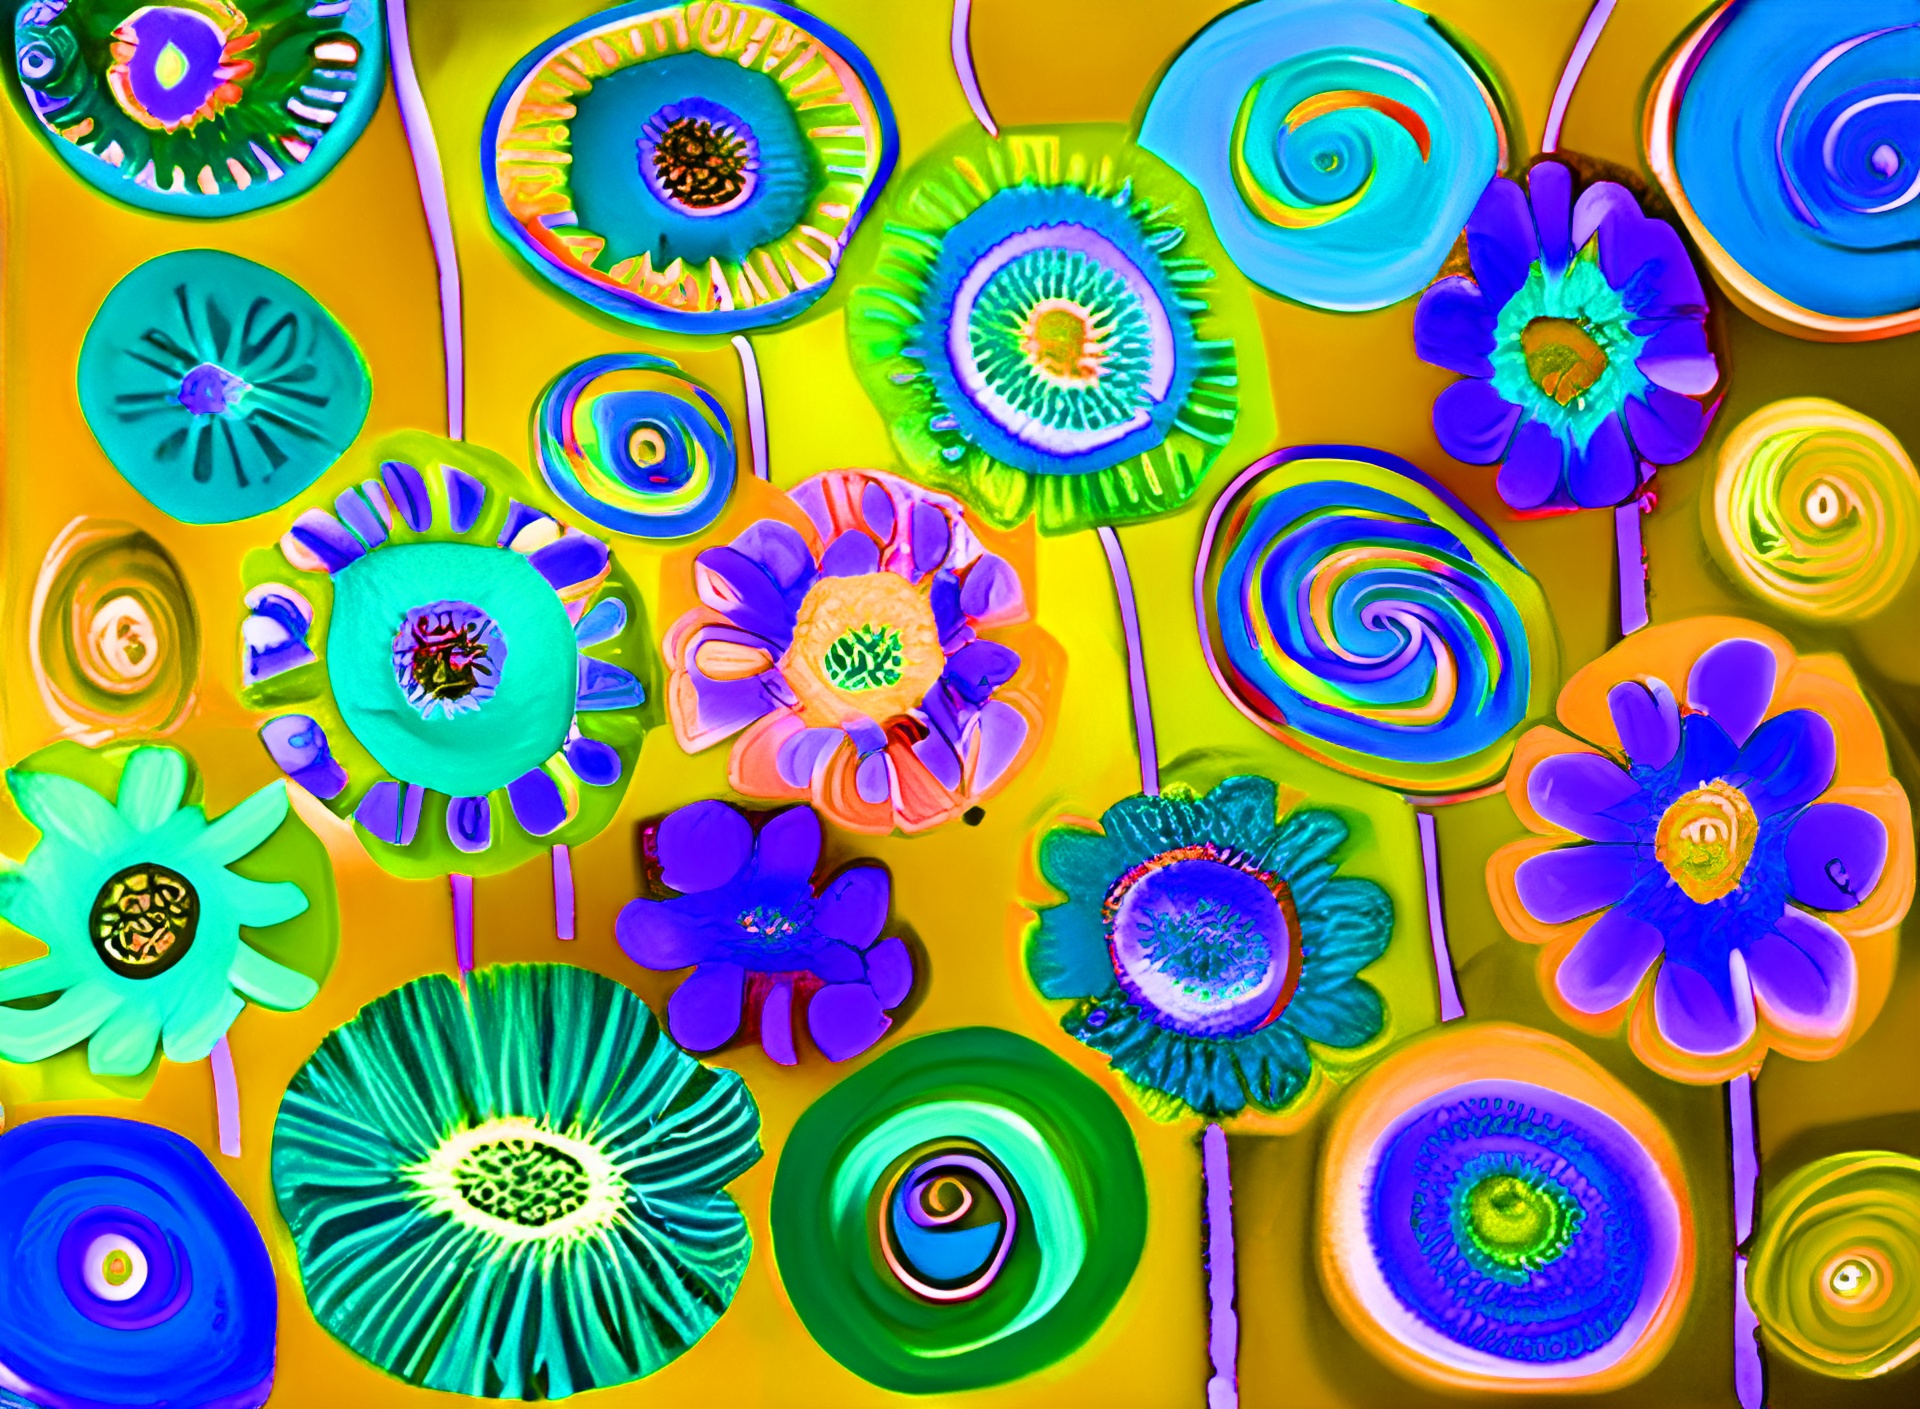 Colorful Digital Art Flowers Free Stock Photo - Public Domain Pictures